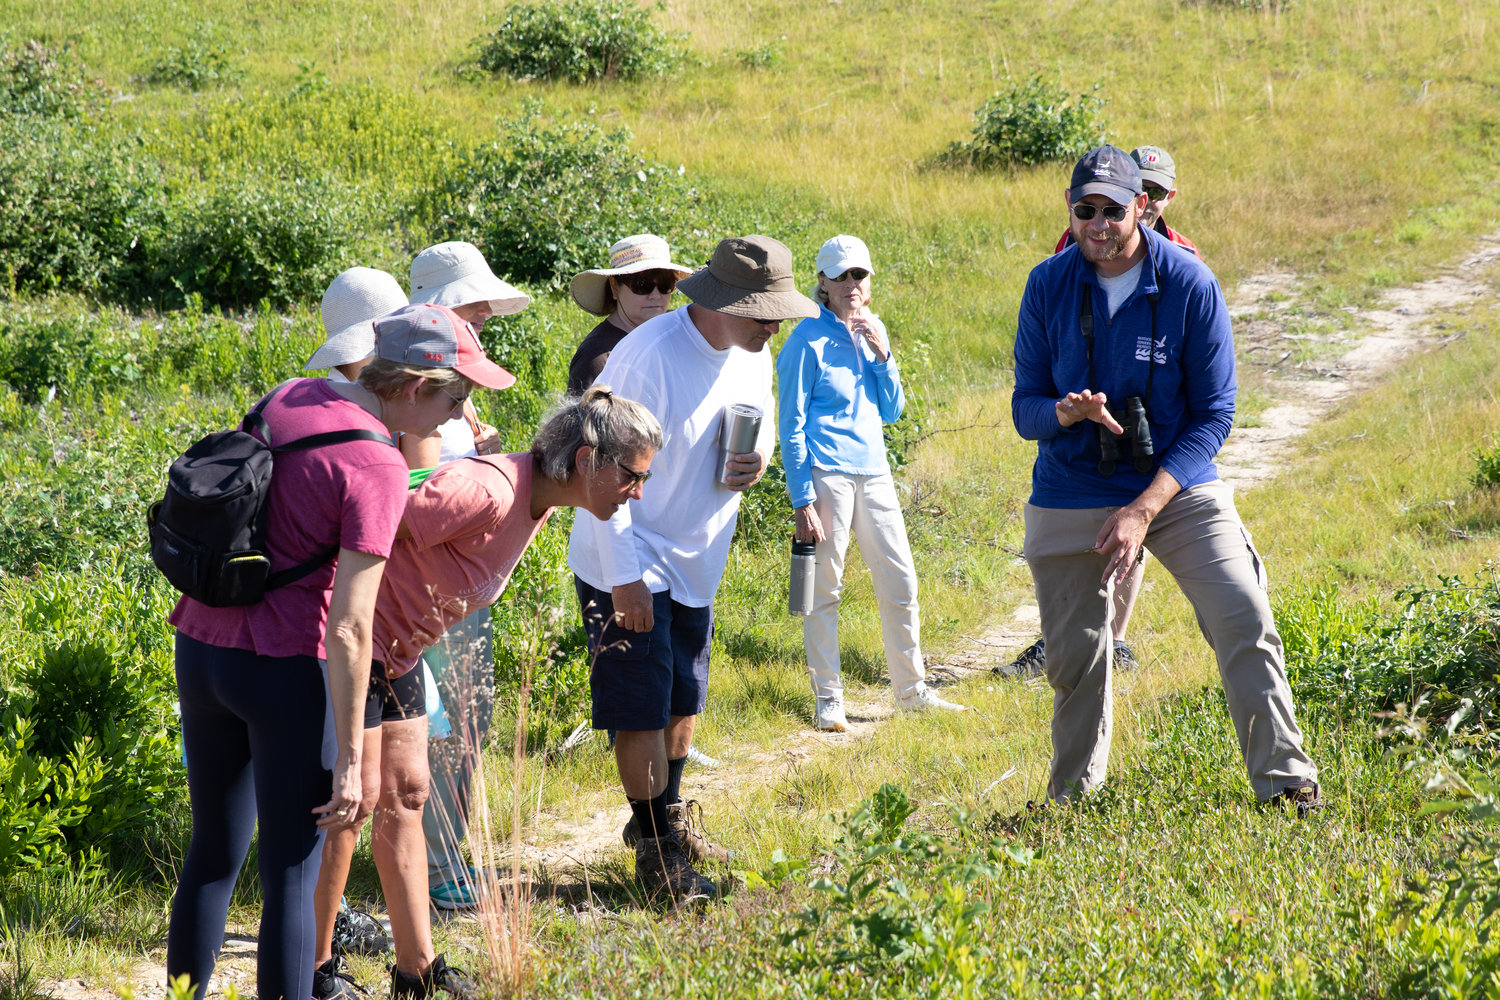 The Nantucket Conservation Foundation’s Neil Foley, right, points out some plants during a nature walk to Altar Rock last week.